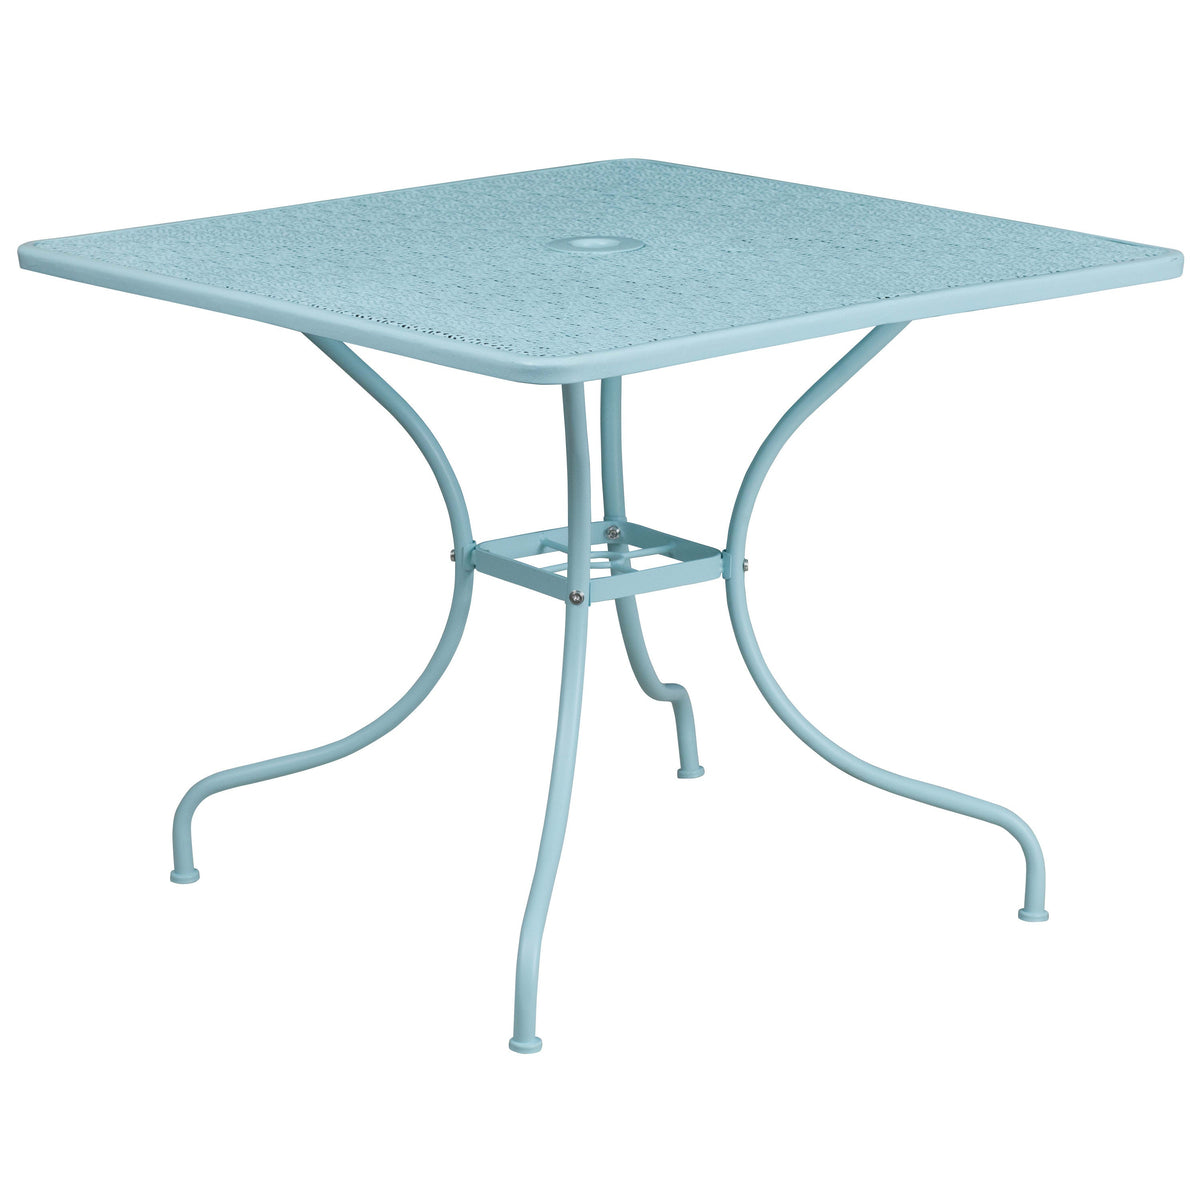 Sky Blue |#| 35.5inch SQ Sky Blue Indoor-Outdoor Steel Patio Table Set w/ 4 Round Back Chairs